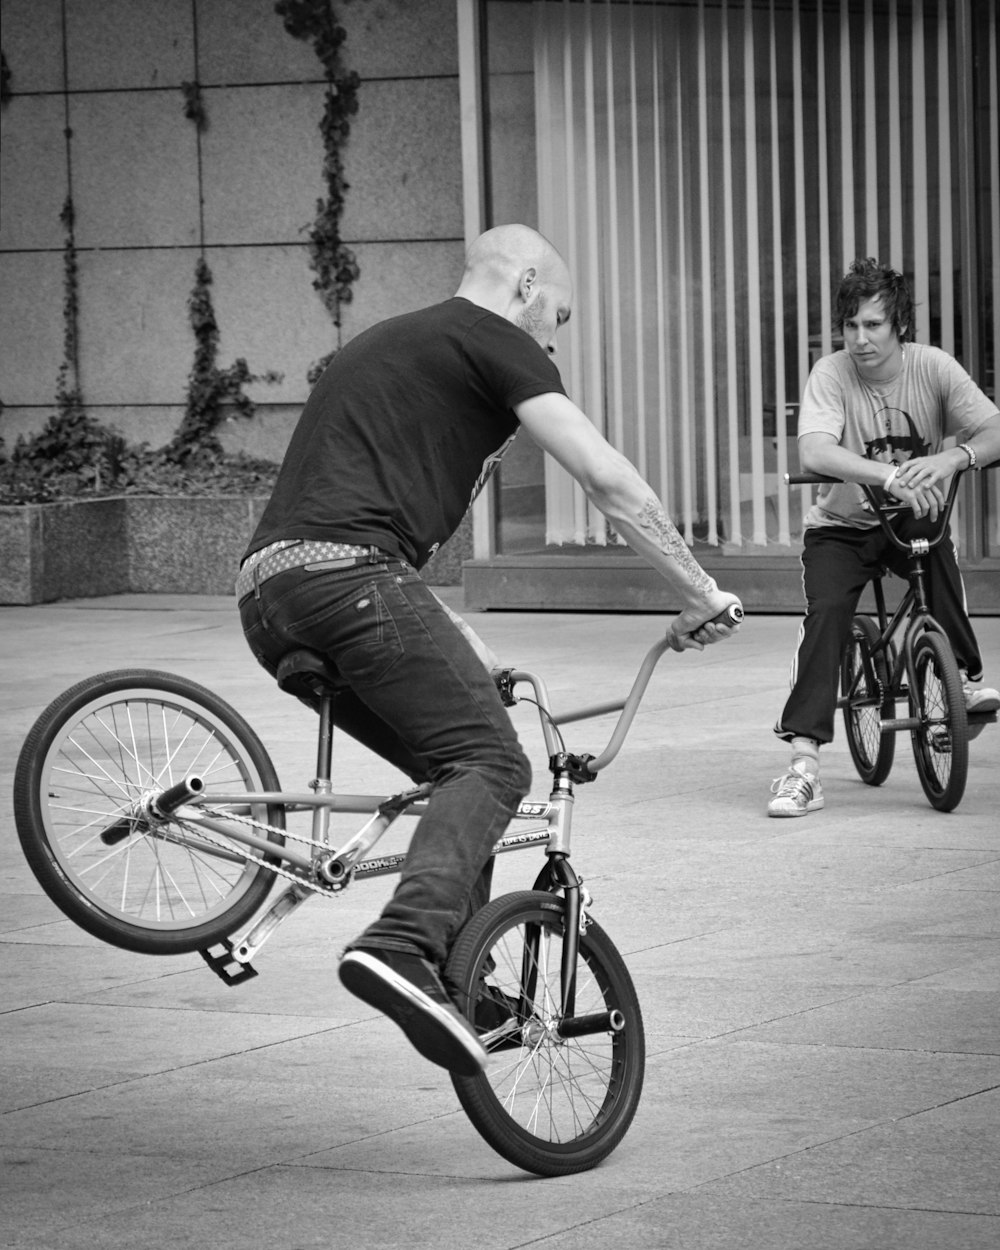 man in black t-shirt riding on bicycle in grayscale photography